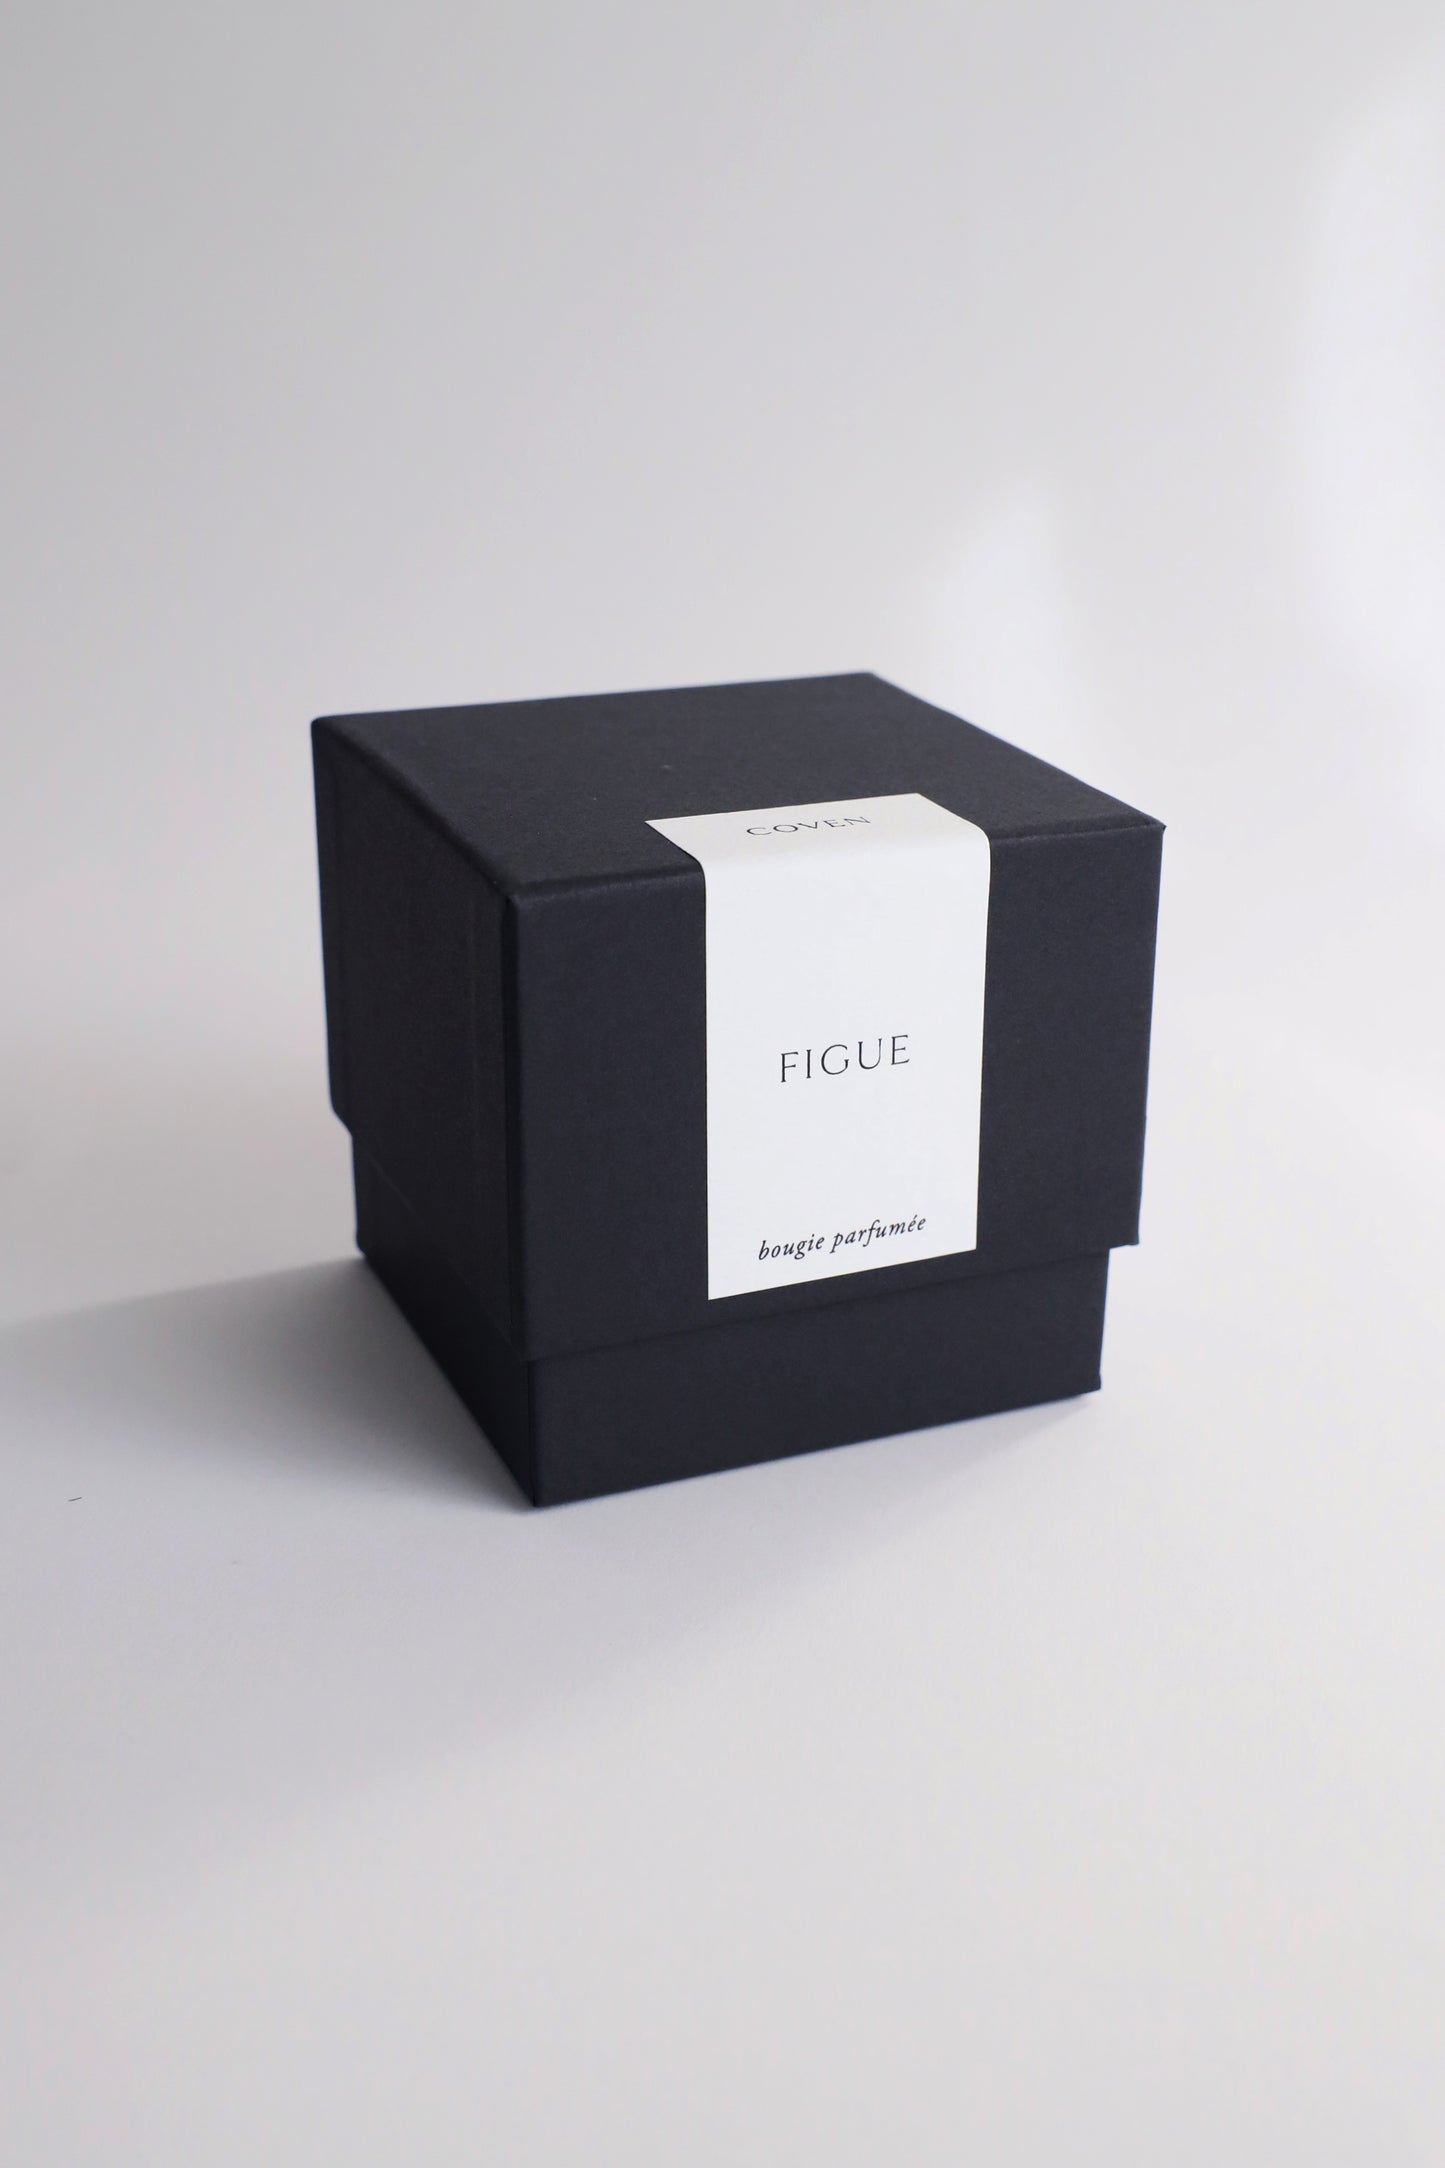 Load image into Gallery viewer, Coven Figue Candle - Luscious Black Fig
